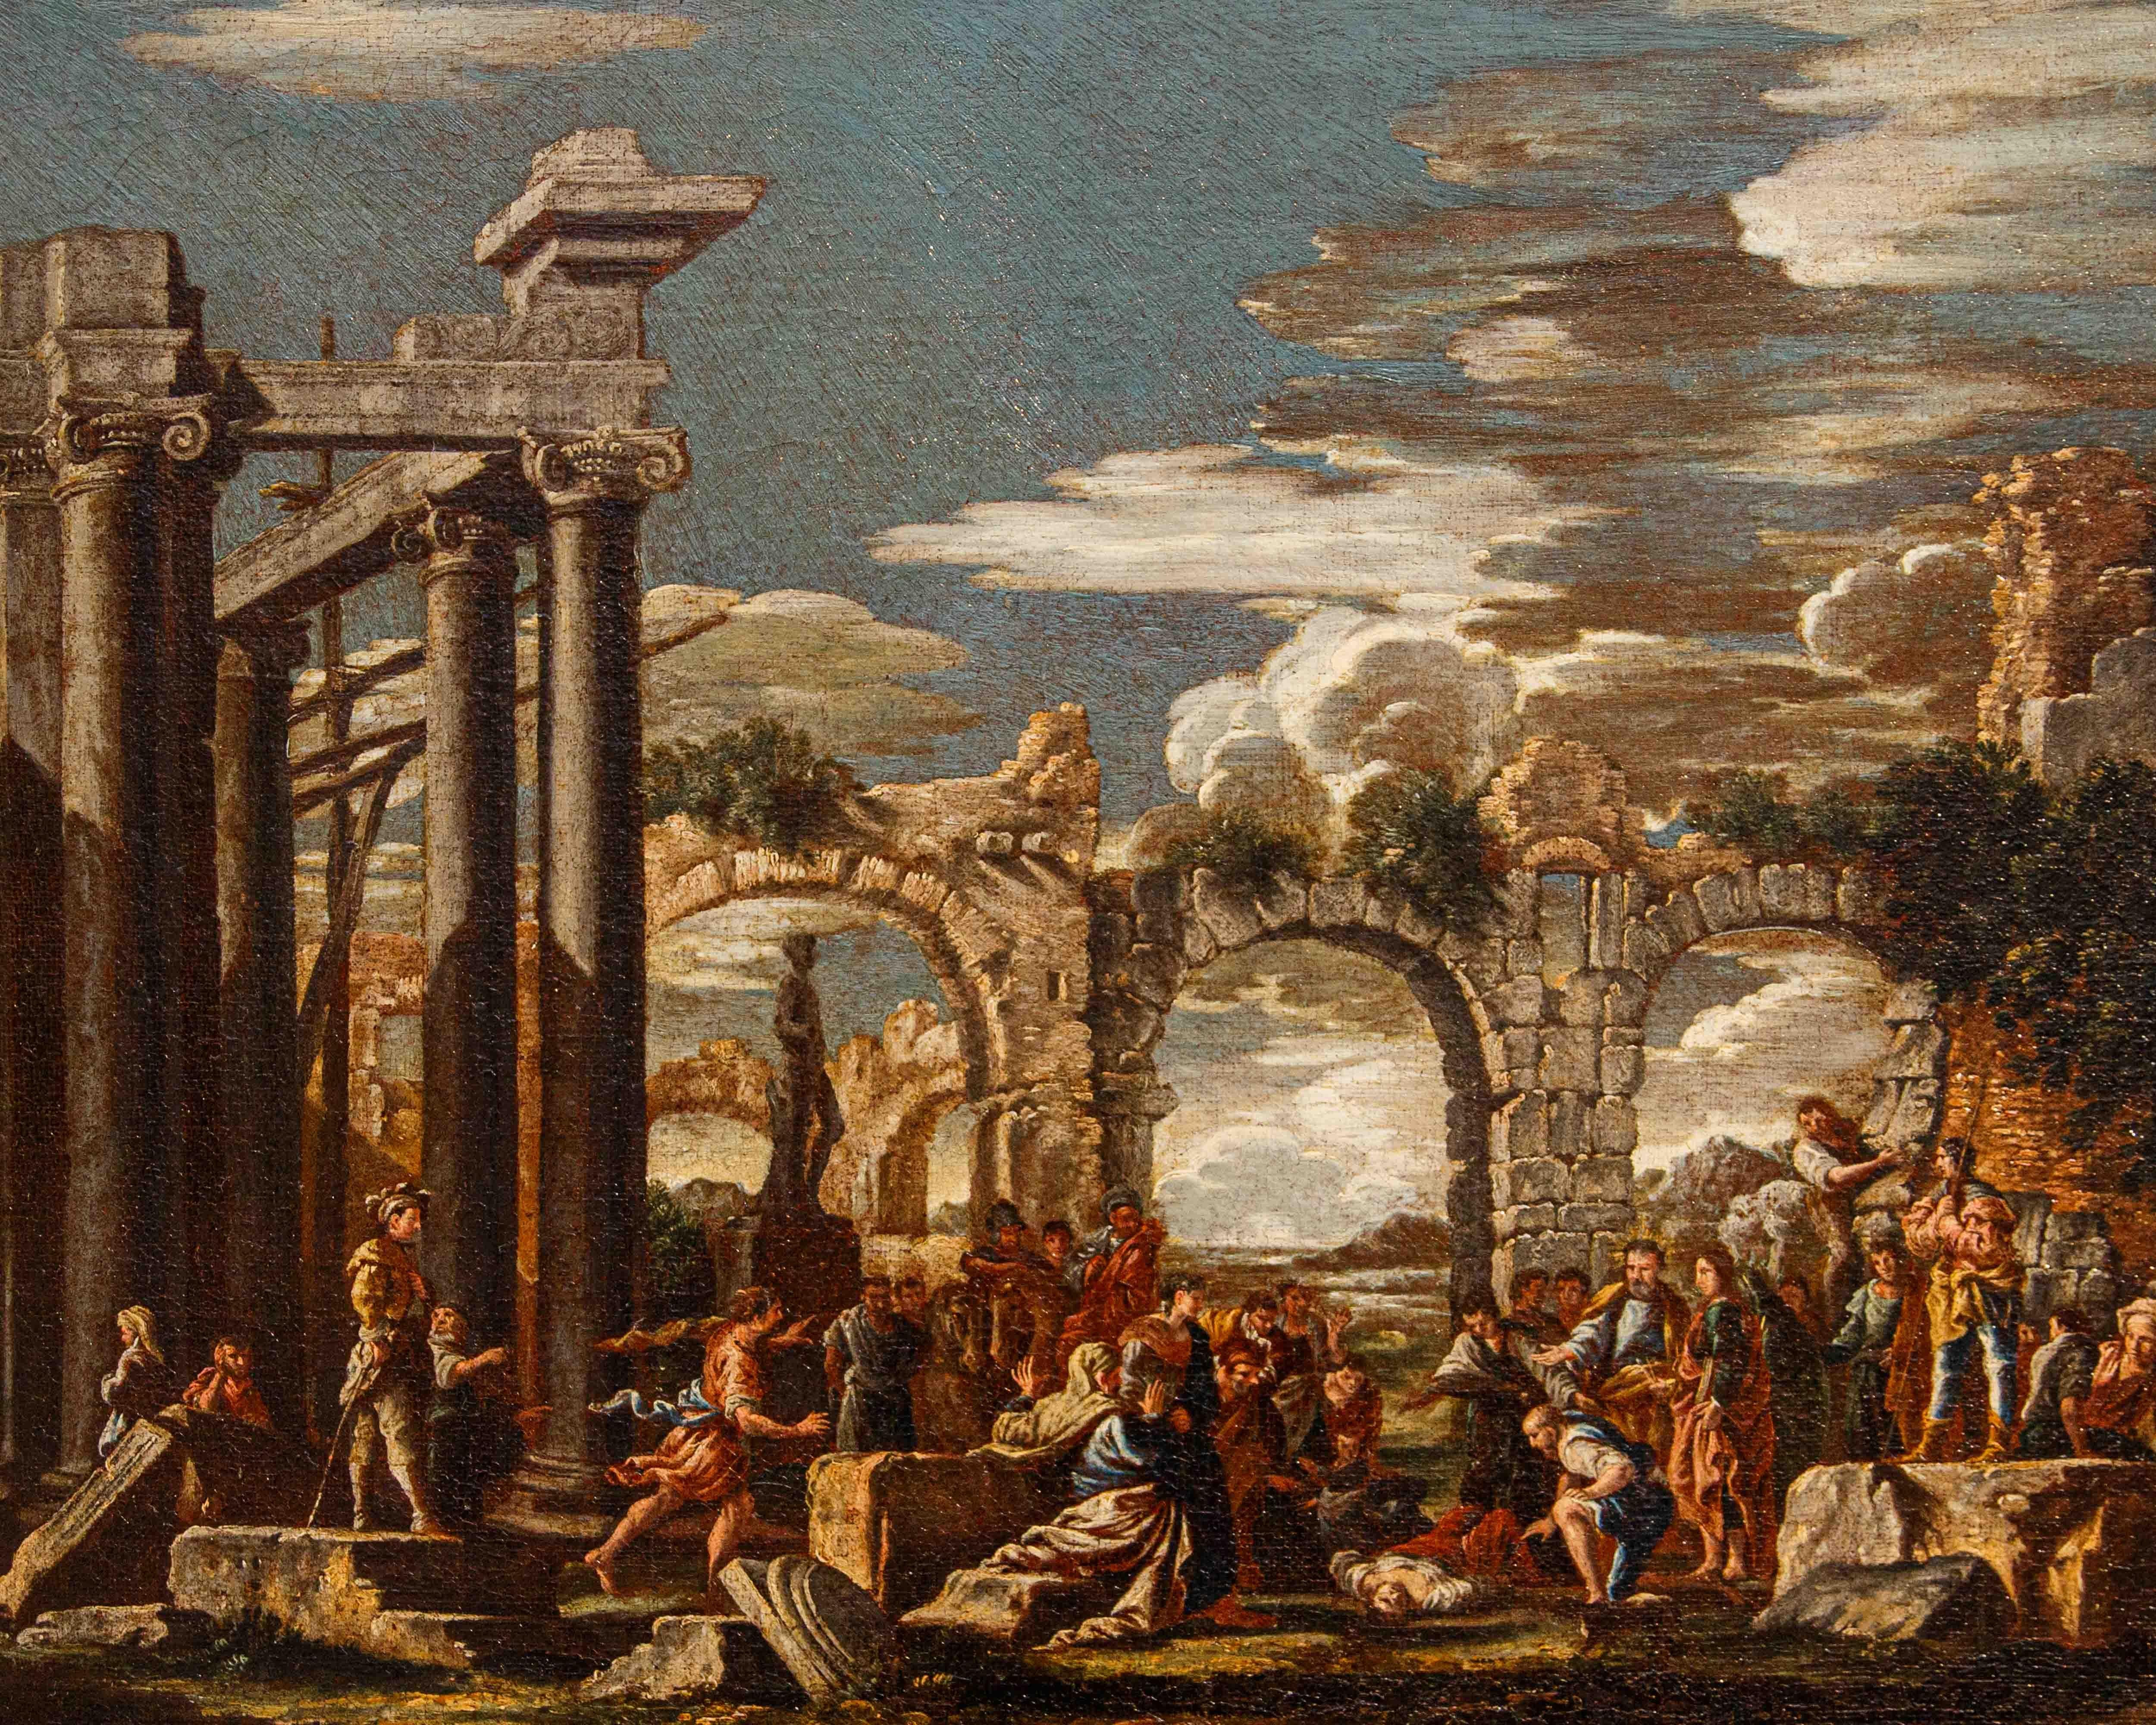 capriccio with biblical scene painted by Giovanni Ghisolfi For Sale 3